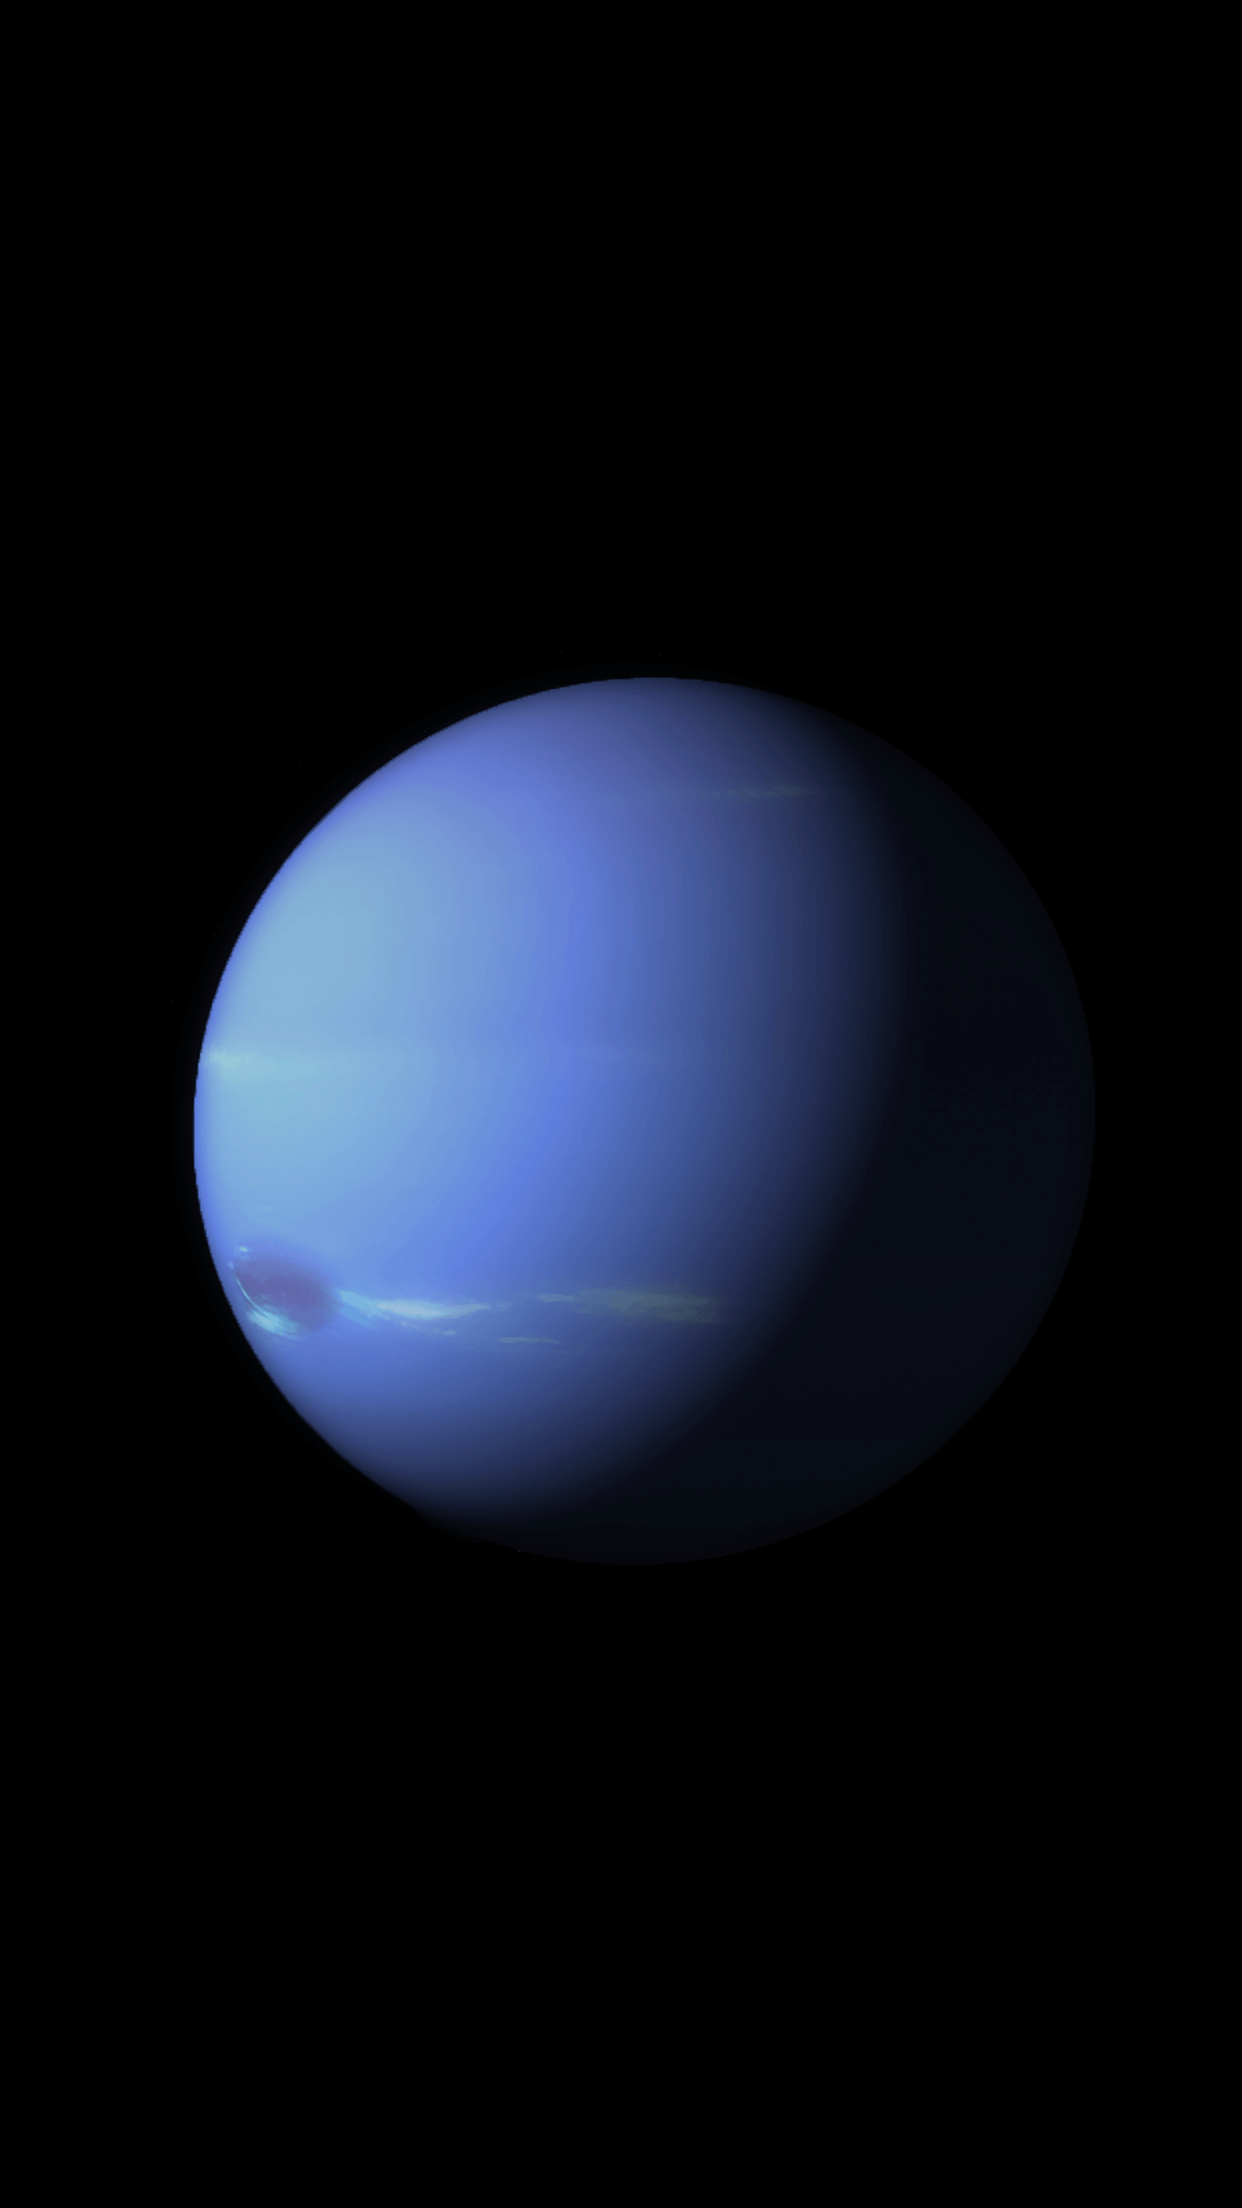 Neptune is part of the new planet themed iOS 9 wallpaper